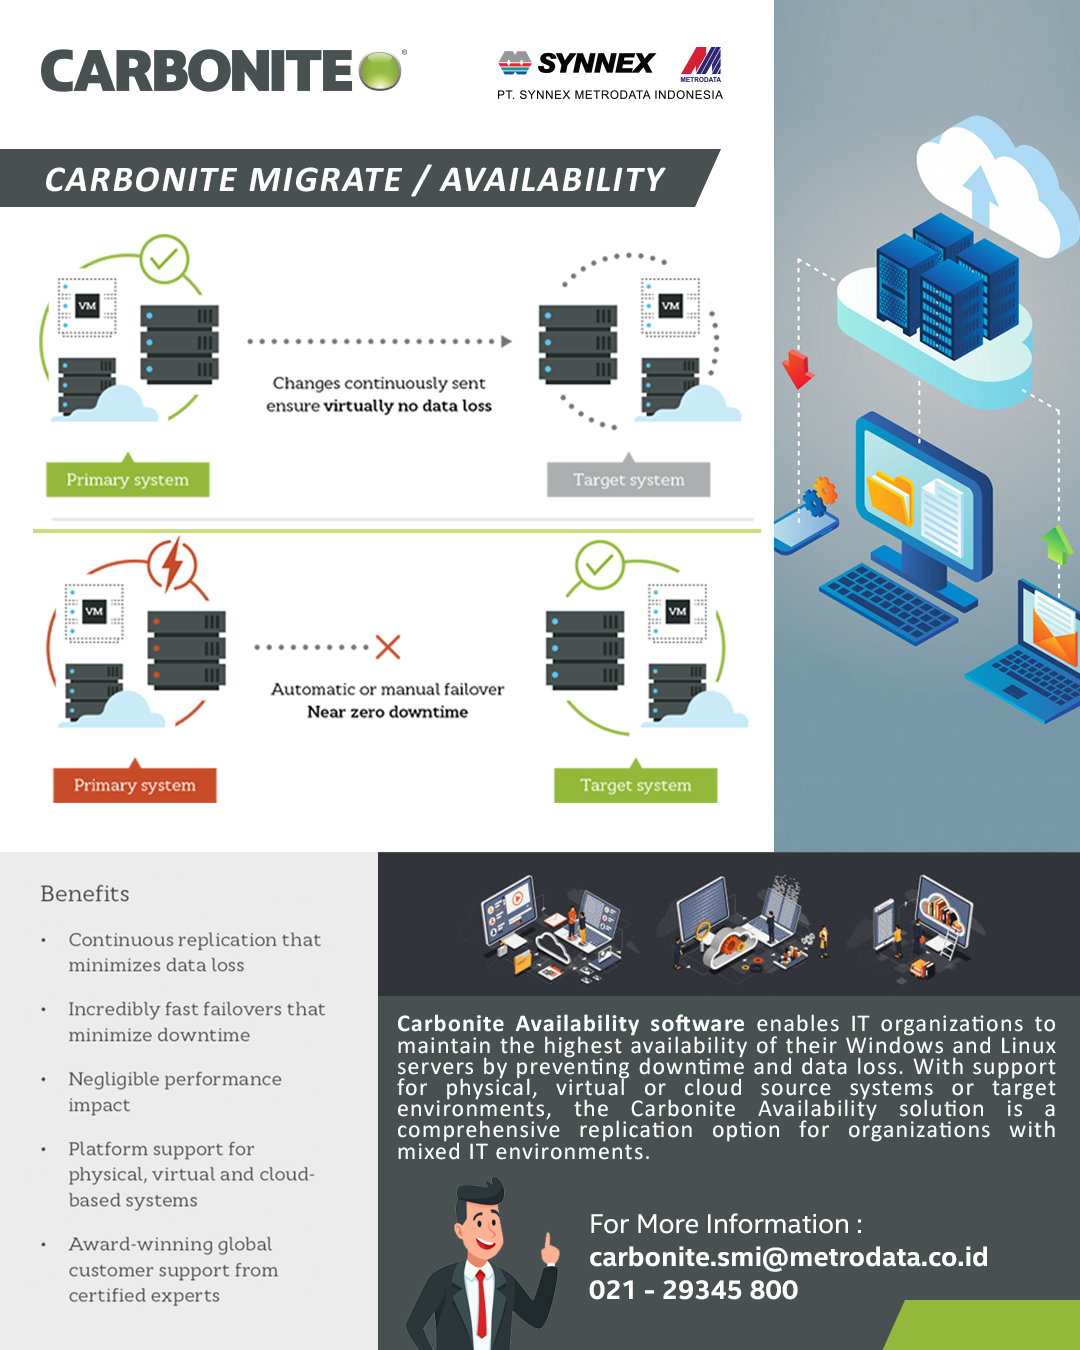 Carbonite Availability